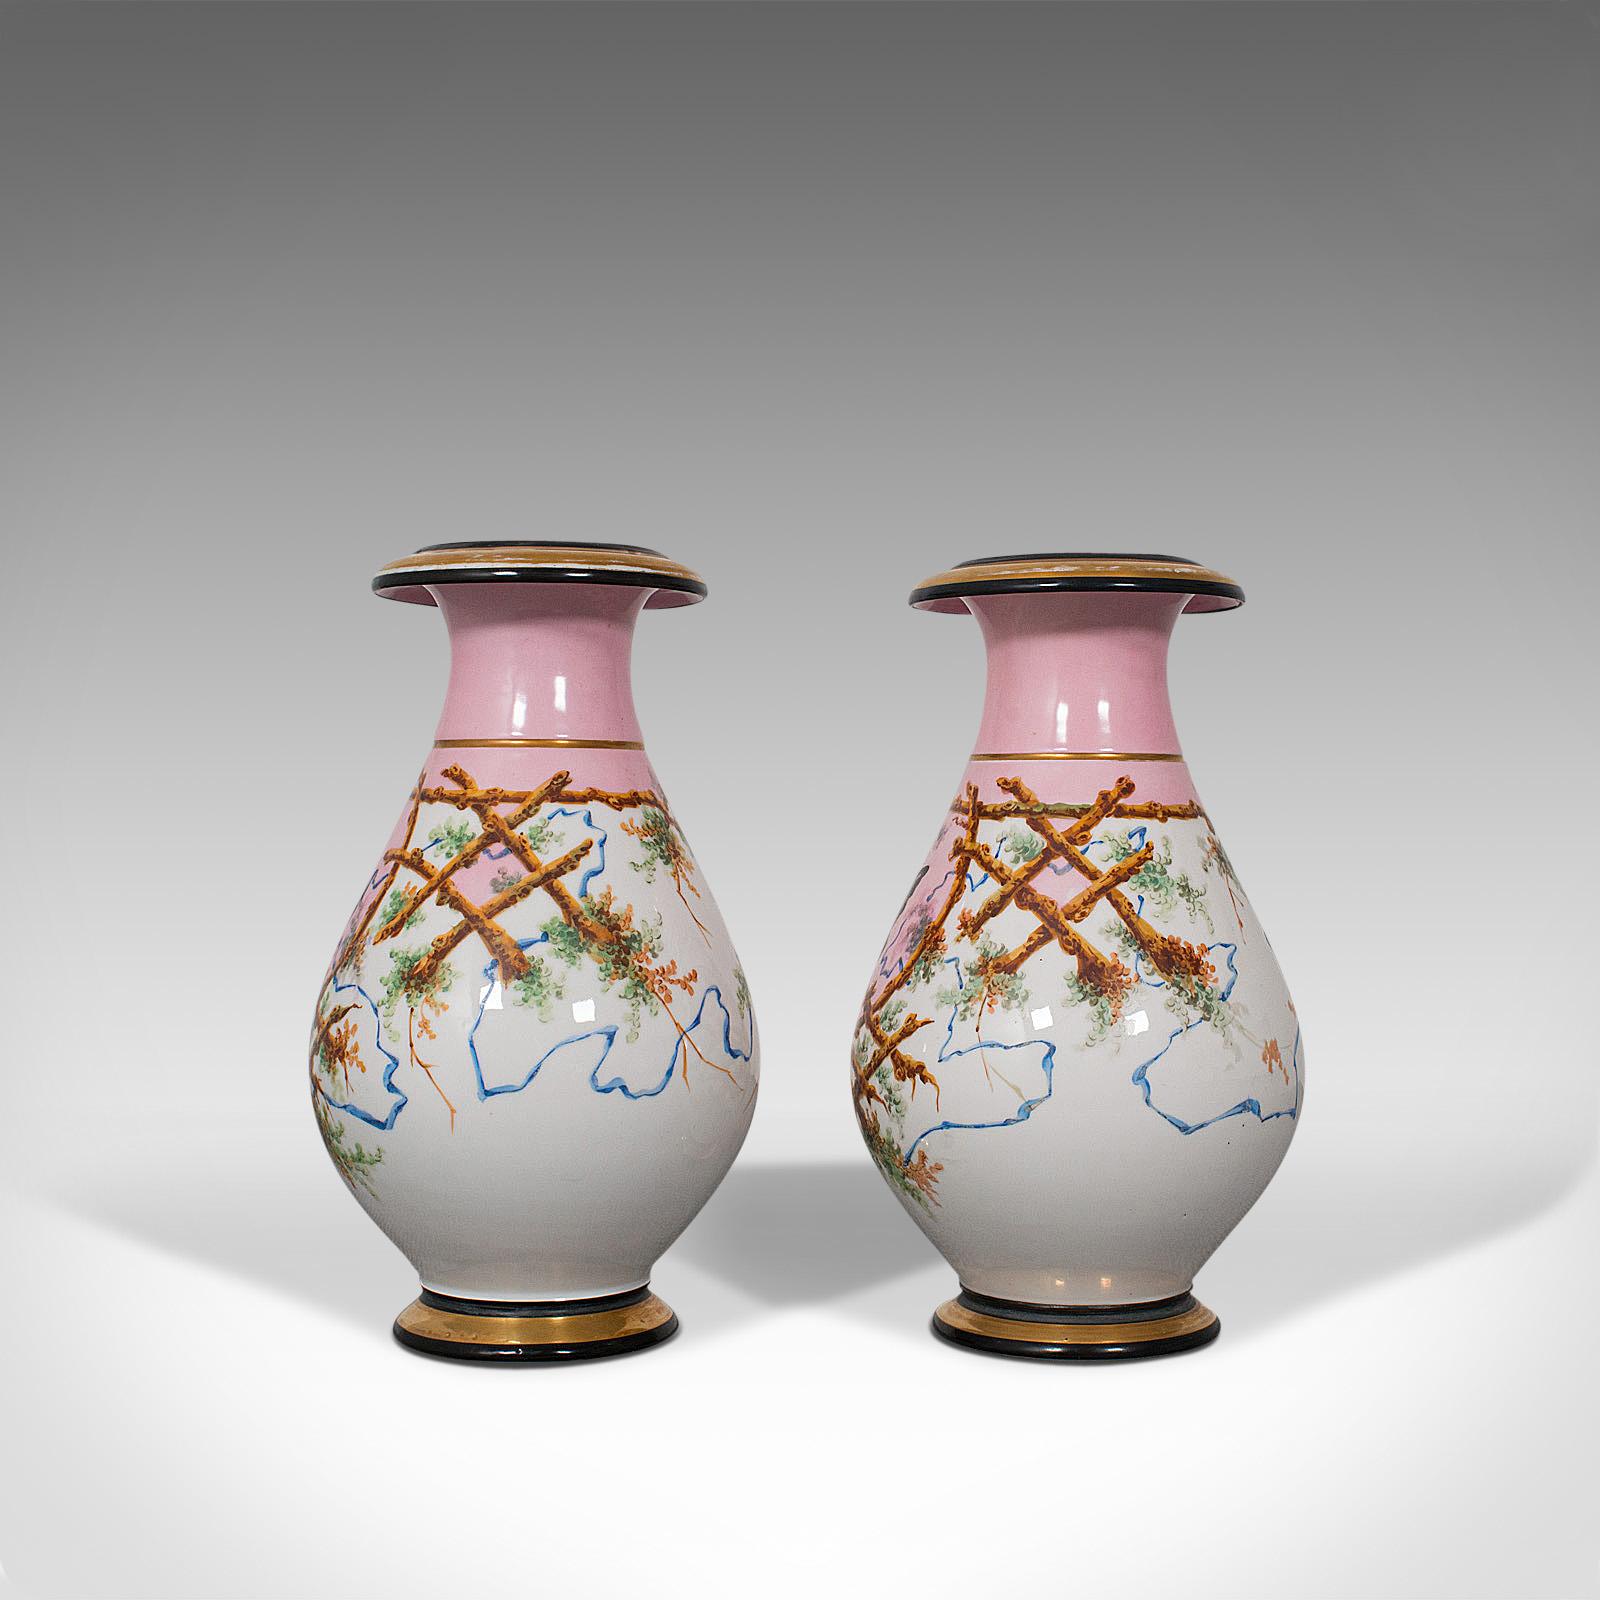 Antique Pair of Peony Vases, French, Decorative Ceramic Urn, Victorian In Good Condition For Sale In Hele, Devon, GB